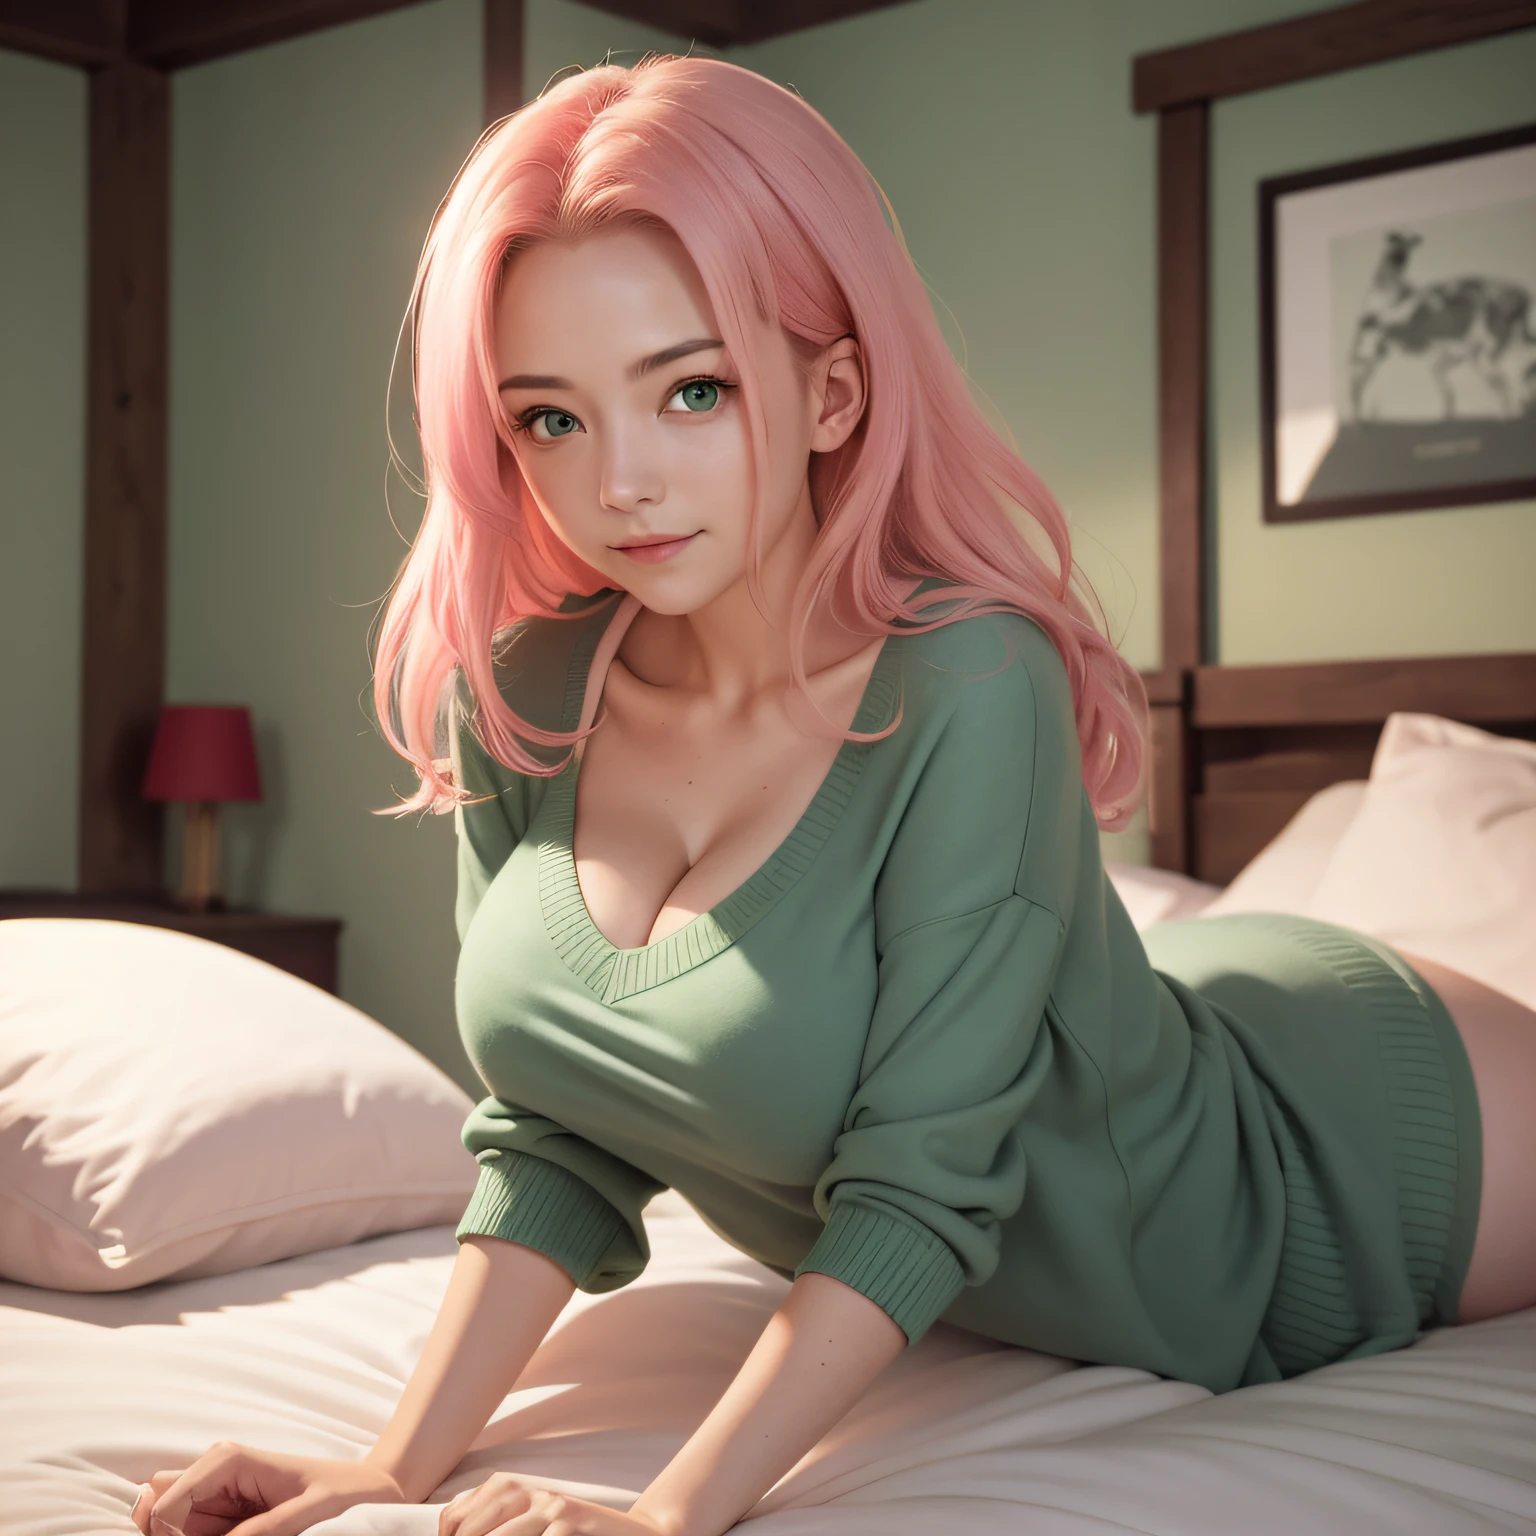 Masterpiece, Best quality at best, 1girl, sakura haruno, Large breasts, Oversized pink sweater, (cleavage), (front view closeup), Raised sexy, is shy, with long pink hair splayed on the pillow, (green eyes:1.3), Forehead protection, (Lying in a soft bed), bare legs tucked under blanket, film movie still, 1 girl in, innocent smile, (A detailed face), (Detailed skin), intricate details, Shallow depth of field, [volume fog], light, Reflectors, a Canon EOS R5, 50MM lens, f/2.8, nffsw, shot at 8k resolution, (high quality, best rendering), Ultra detailed, 1girl, 25 years, Large breasts, Blush, front view, serene angle, Masterpiece, pink oversized sweater, long pink hair (large breasts:1.4), (upper body shot), (looking at camera), (relaxed in bed)